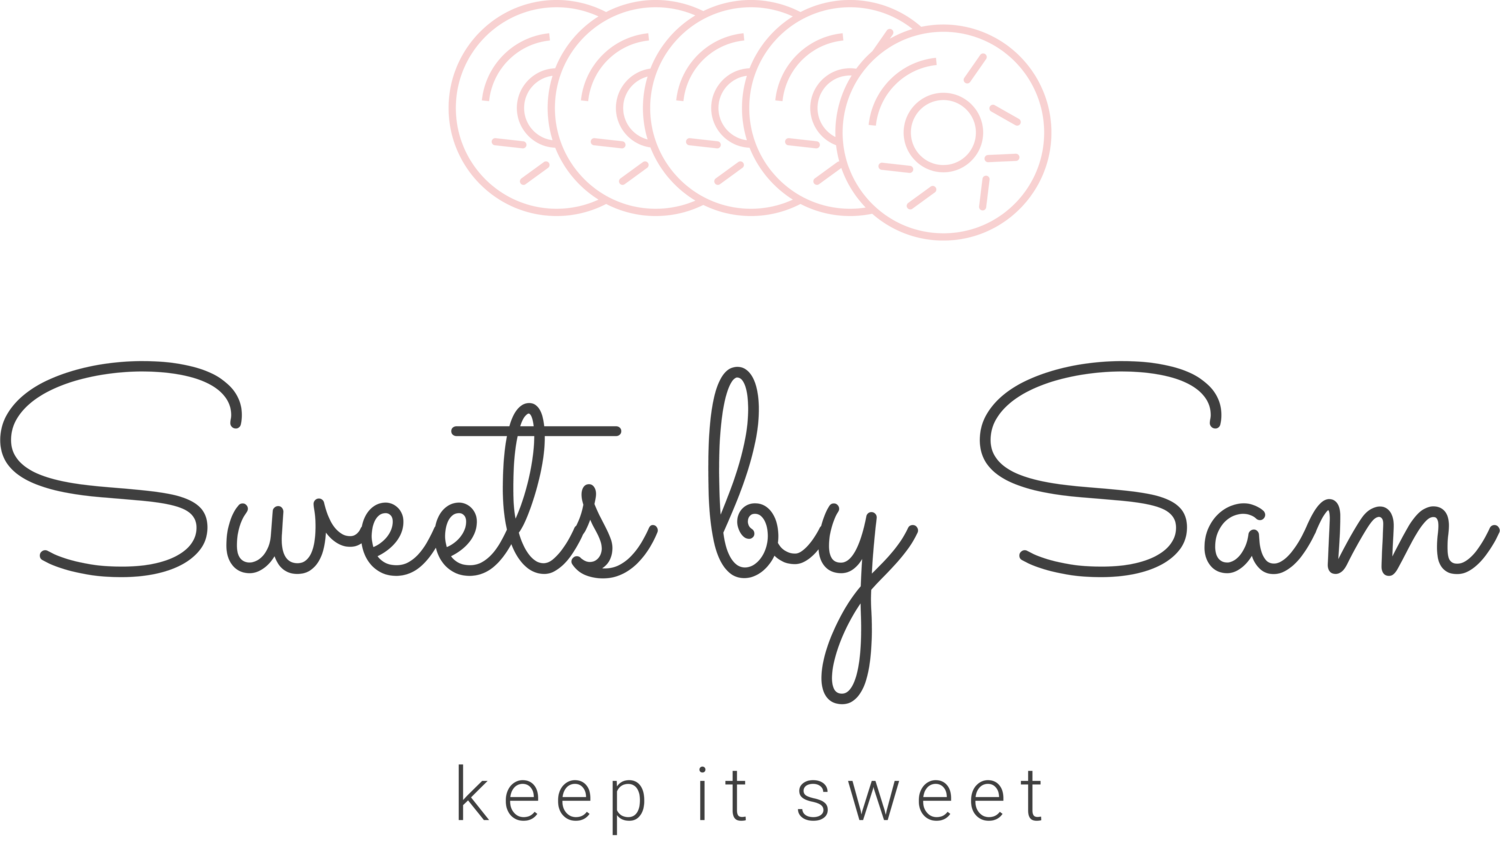 Sweets by Sam